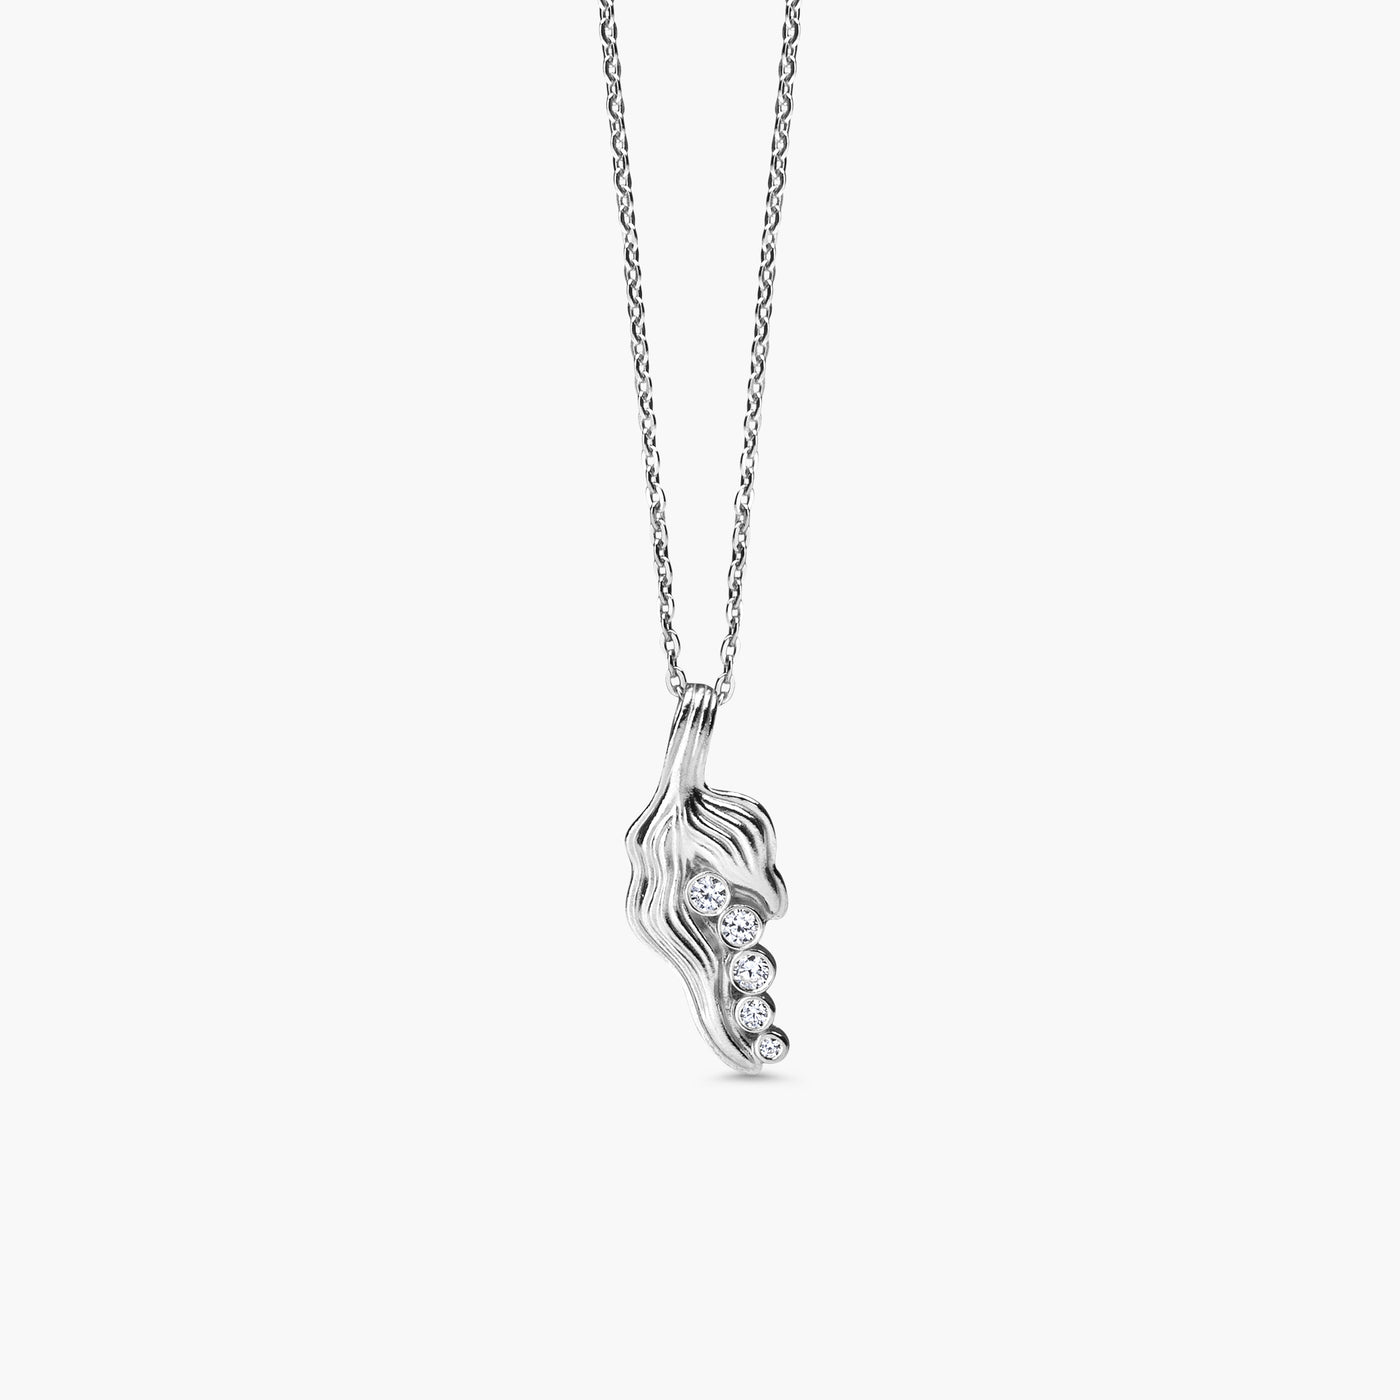 Five Peas from a Pod Necklace • White zirconia